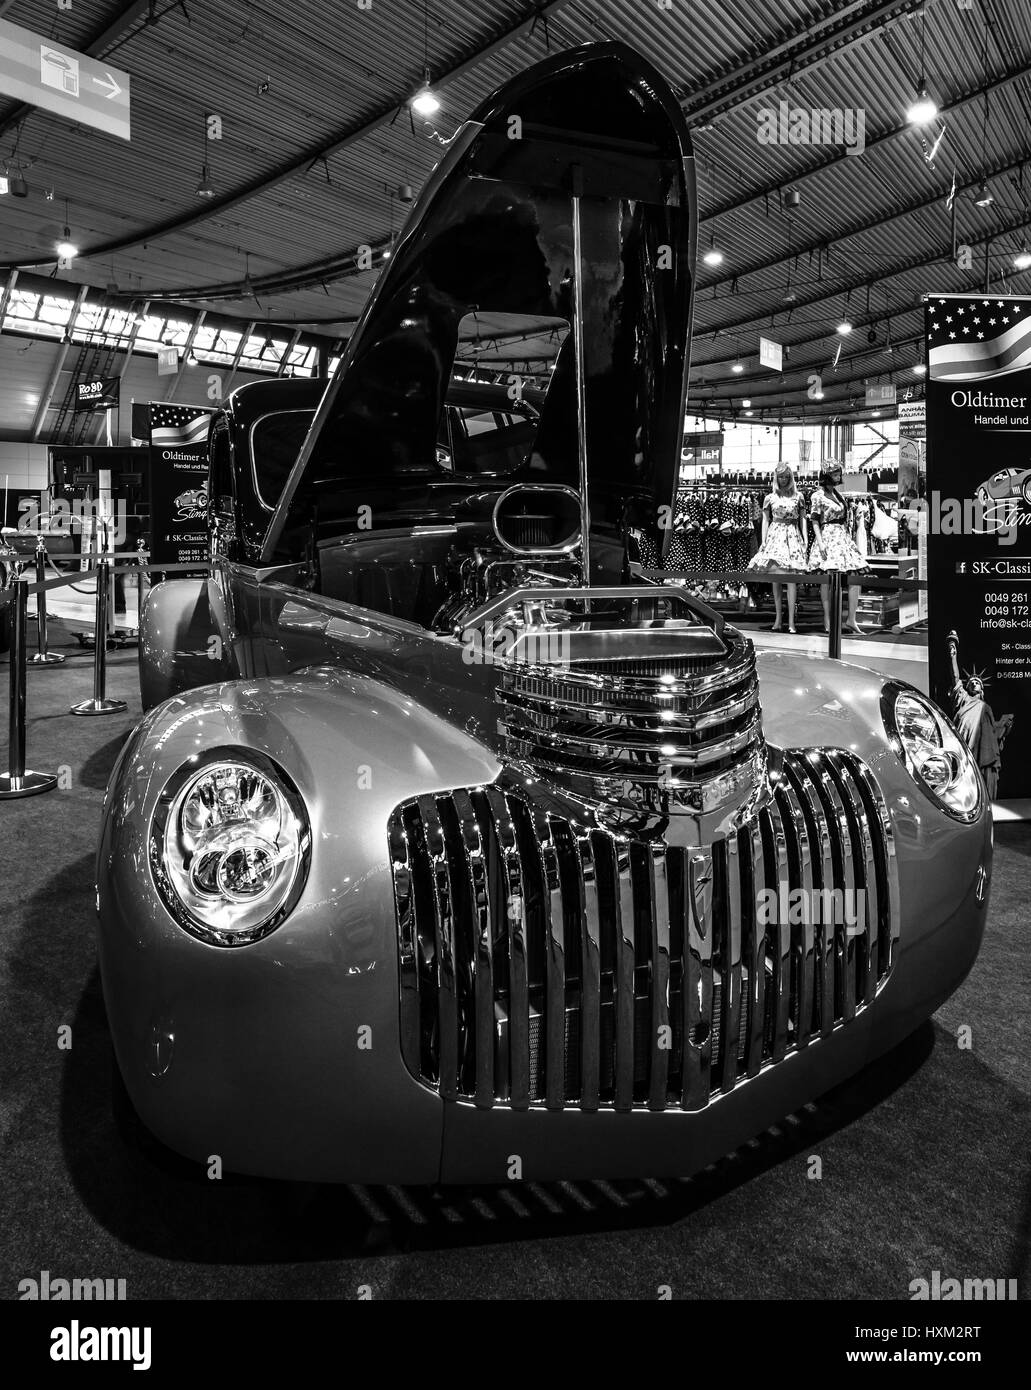 STUTTGART, GERMANY - MARCH 02, 2017: Pickup Chevrolet AK Series, 1946. Black and white. Europe's greatest classic car exhibition 'RETRO CLASSICS' Stock Photo